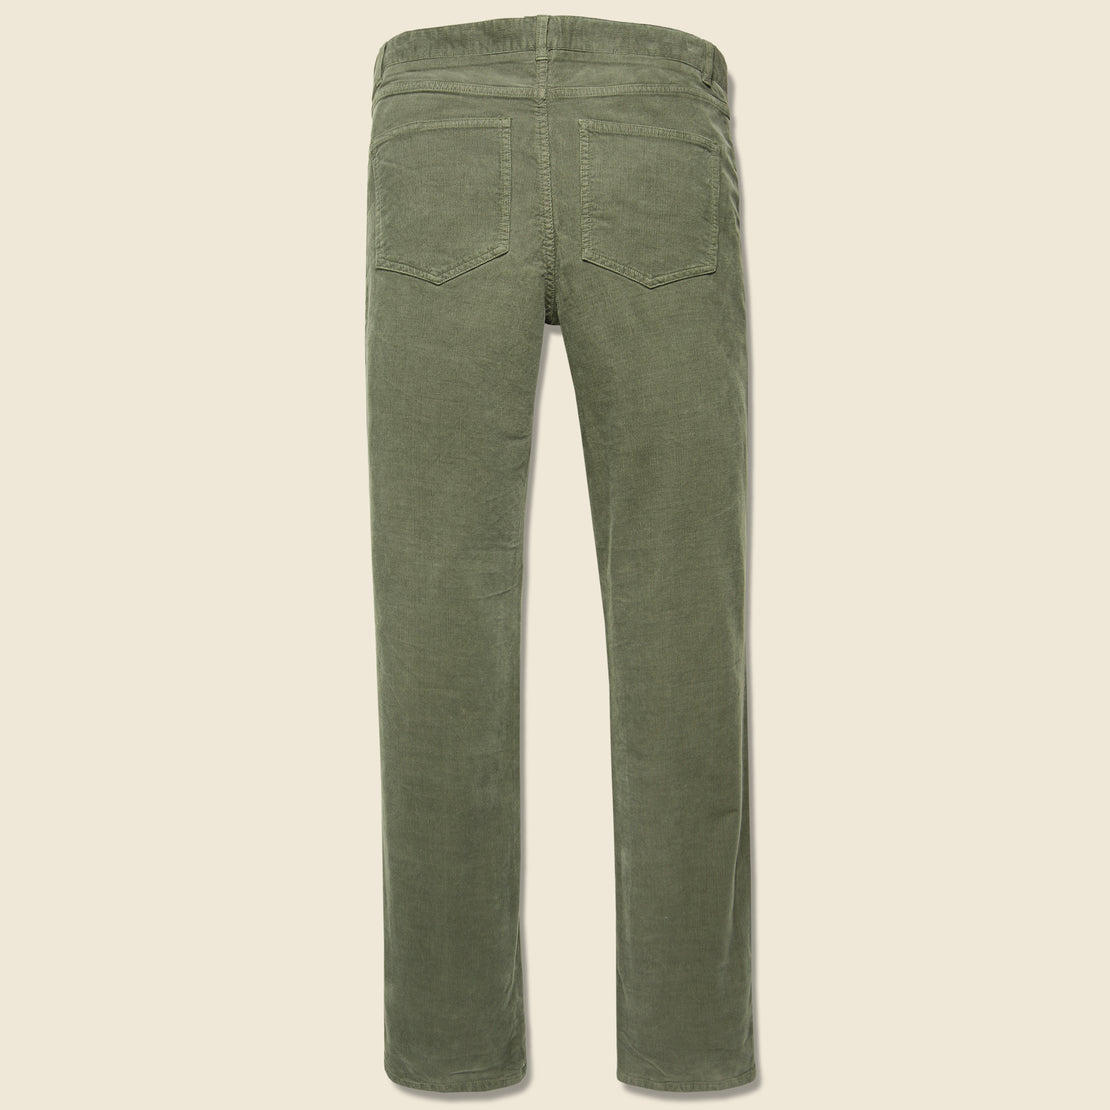 Stretch Corduroy Pant - Washed Olive - Faherty - STAG Provisions - Pants - Corduroy